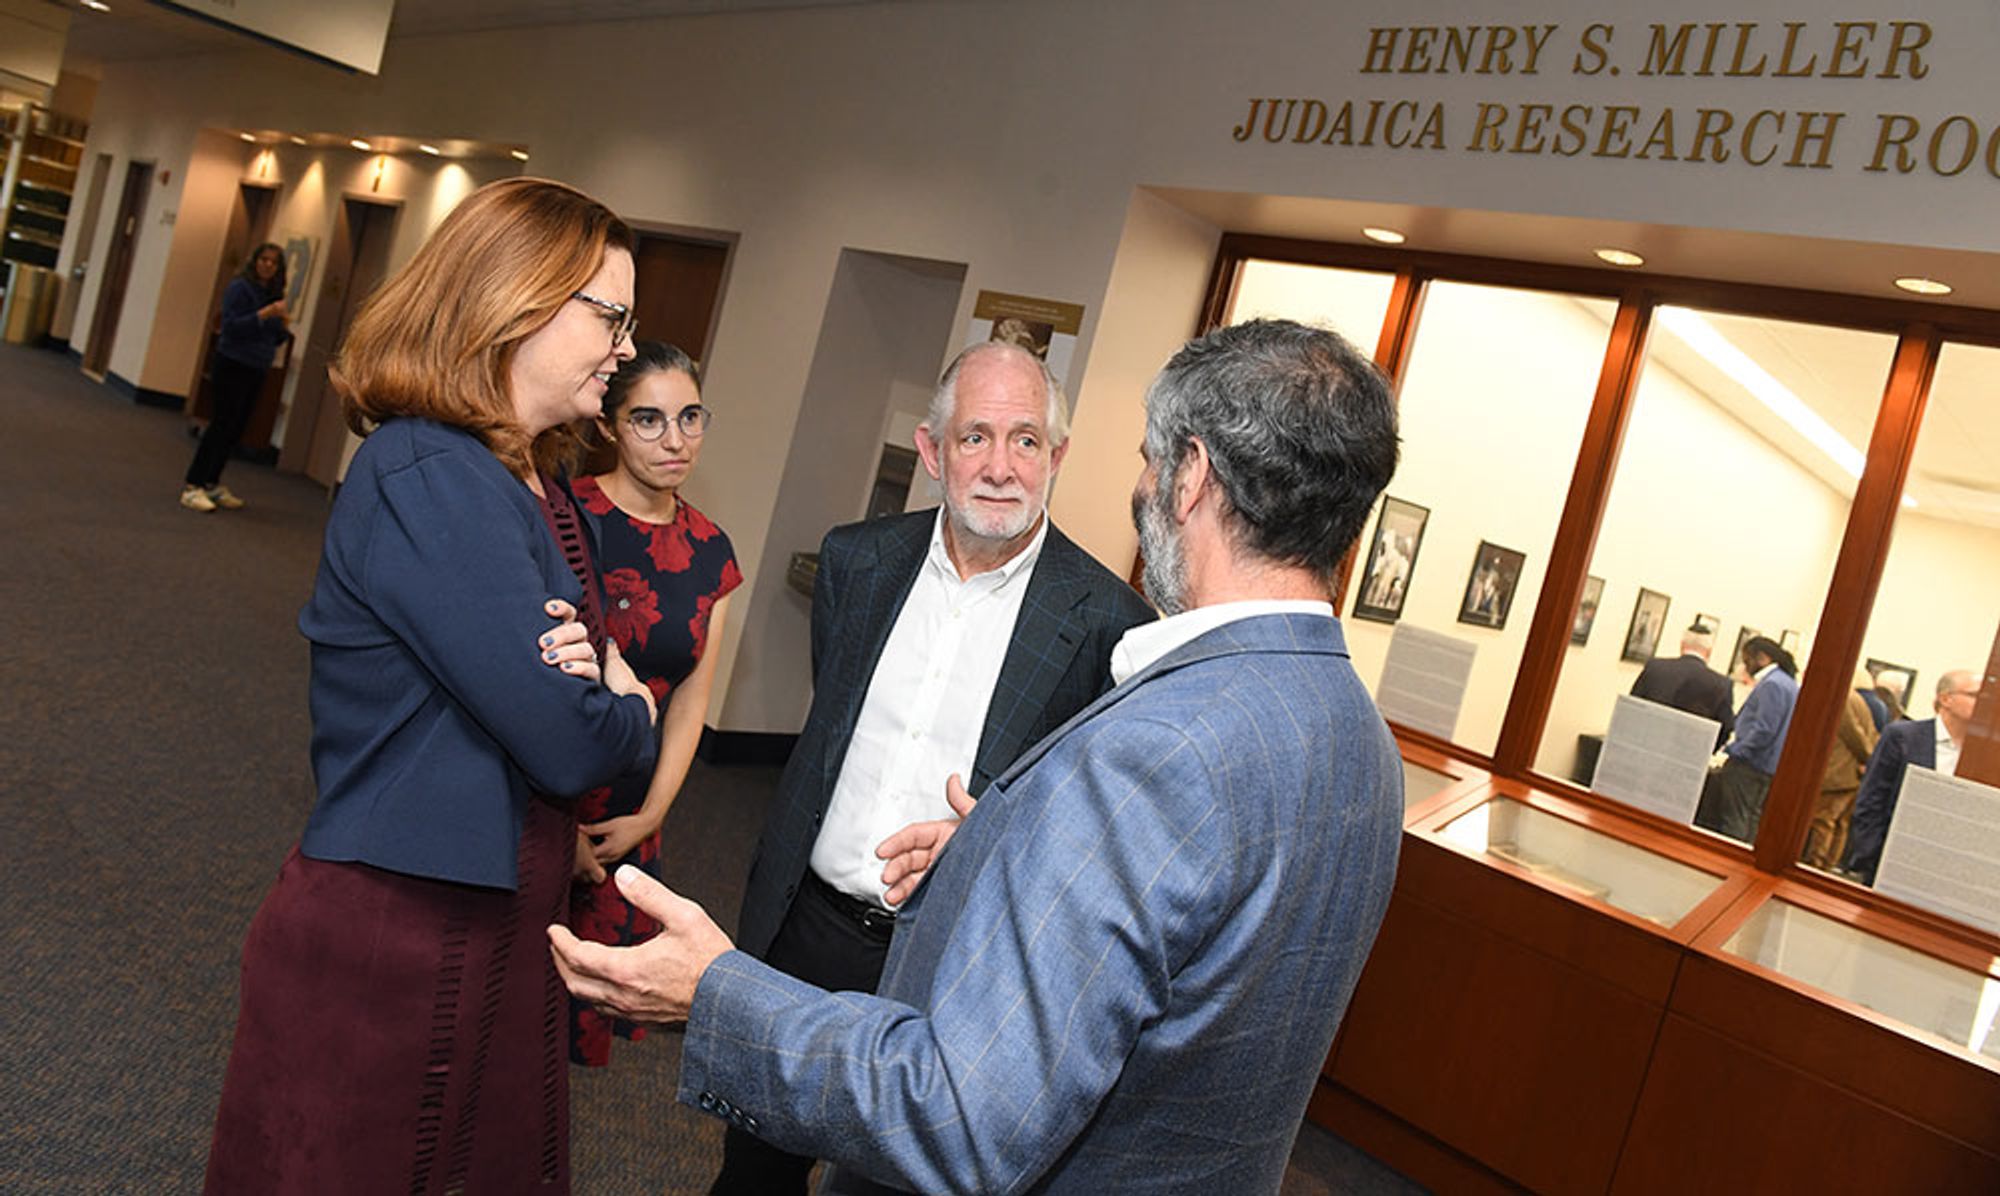 Miller outside the Judaica Research Room bearing his name with President Tania Tetlow and Professor Sarit Kattan Gribetz.